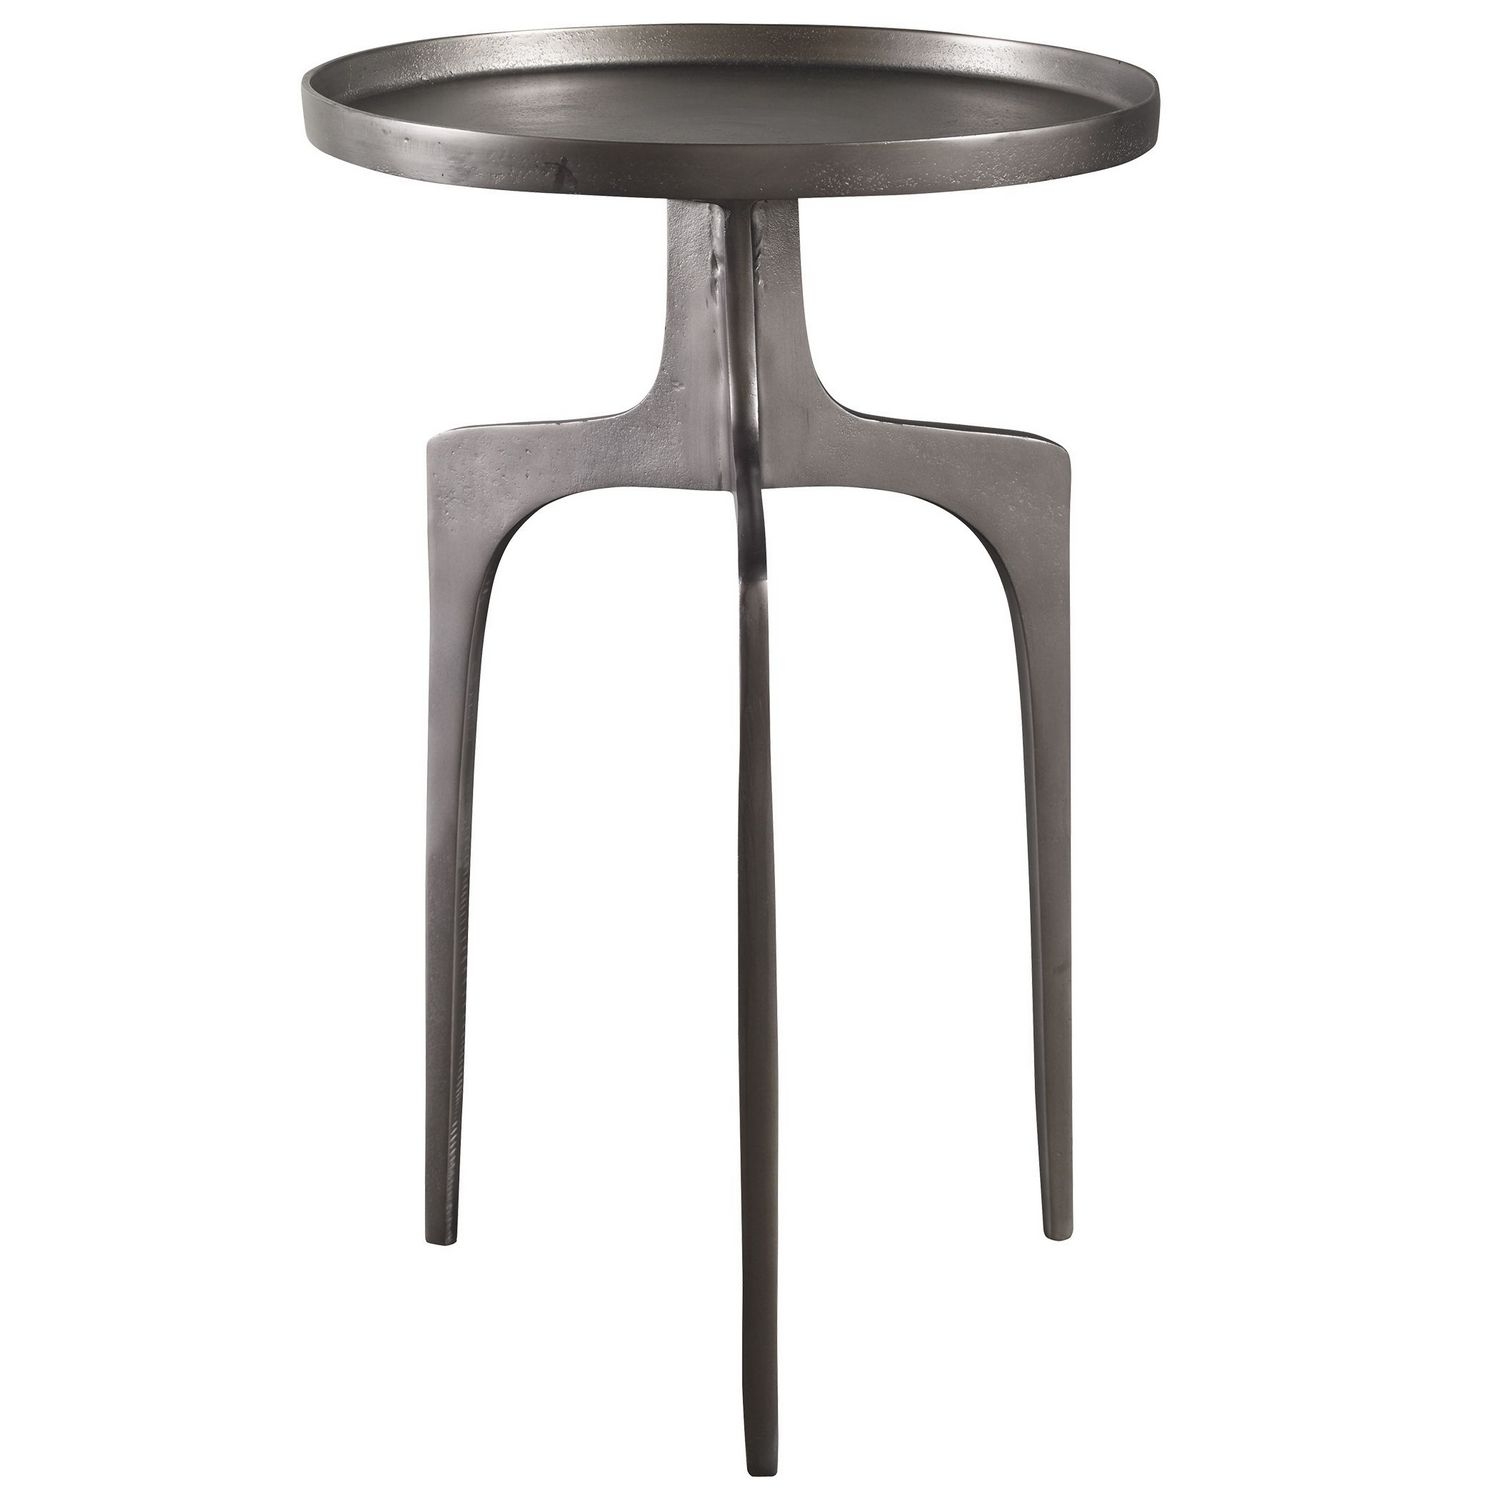 Uttermost Kenna Accent Table - Nickel